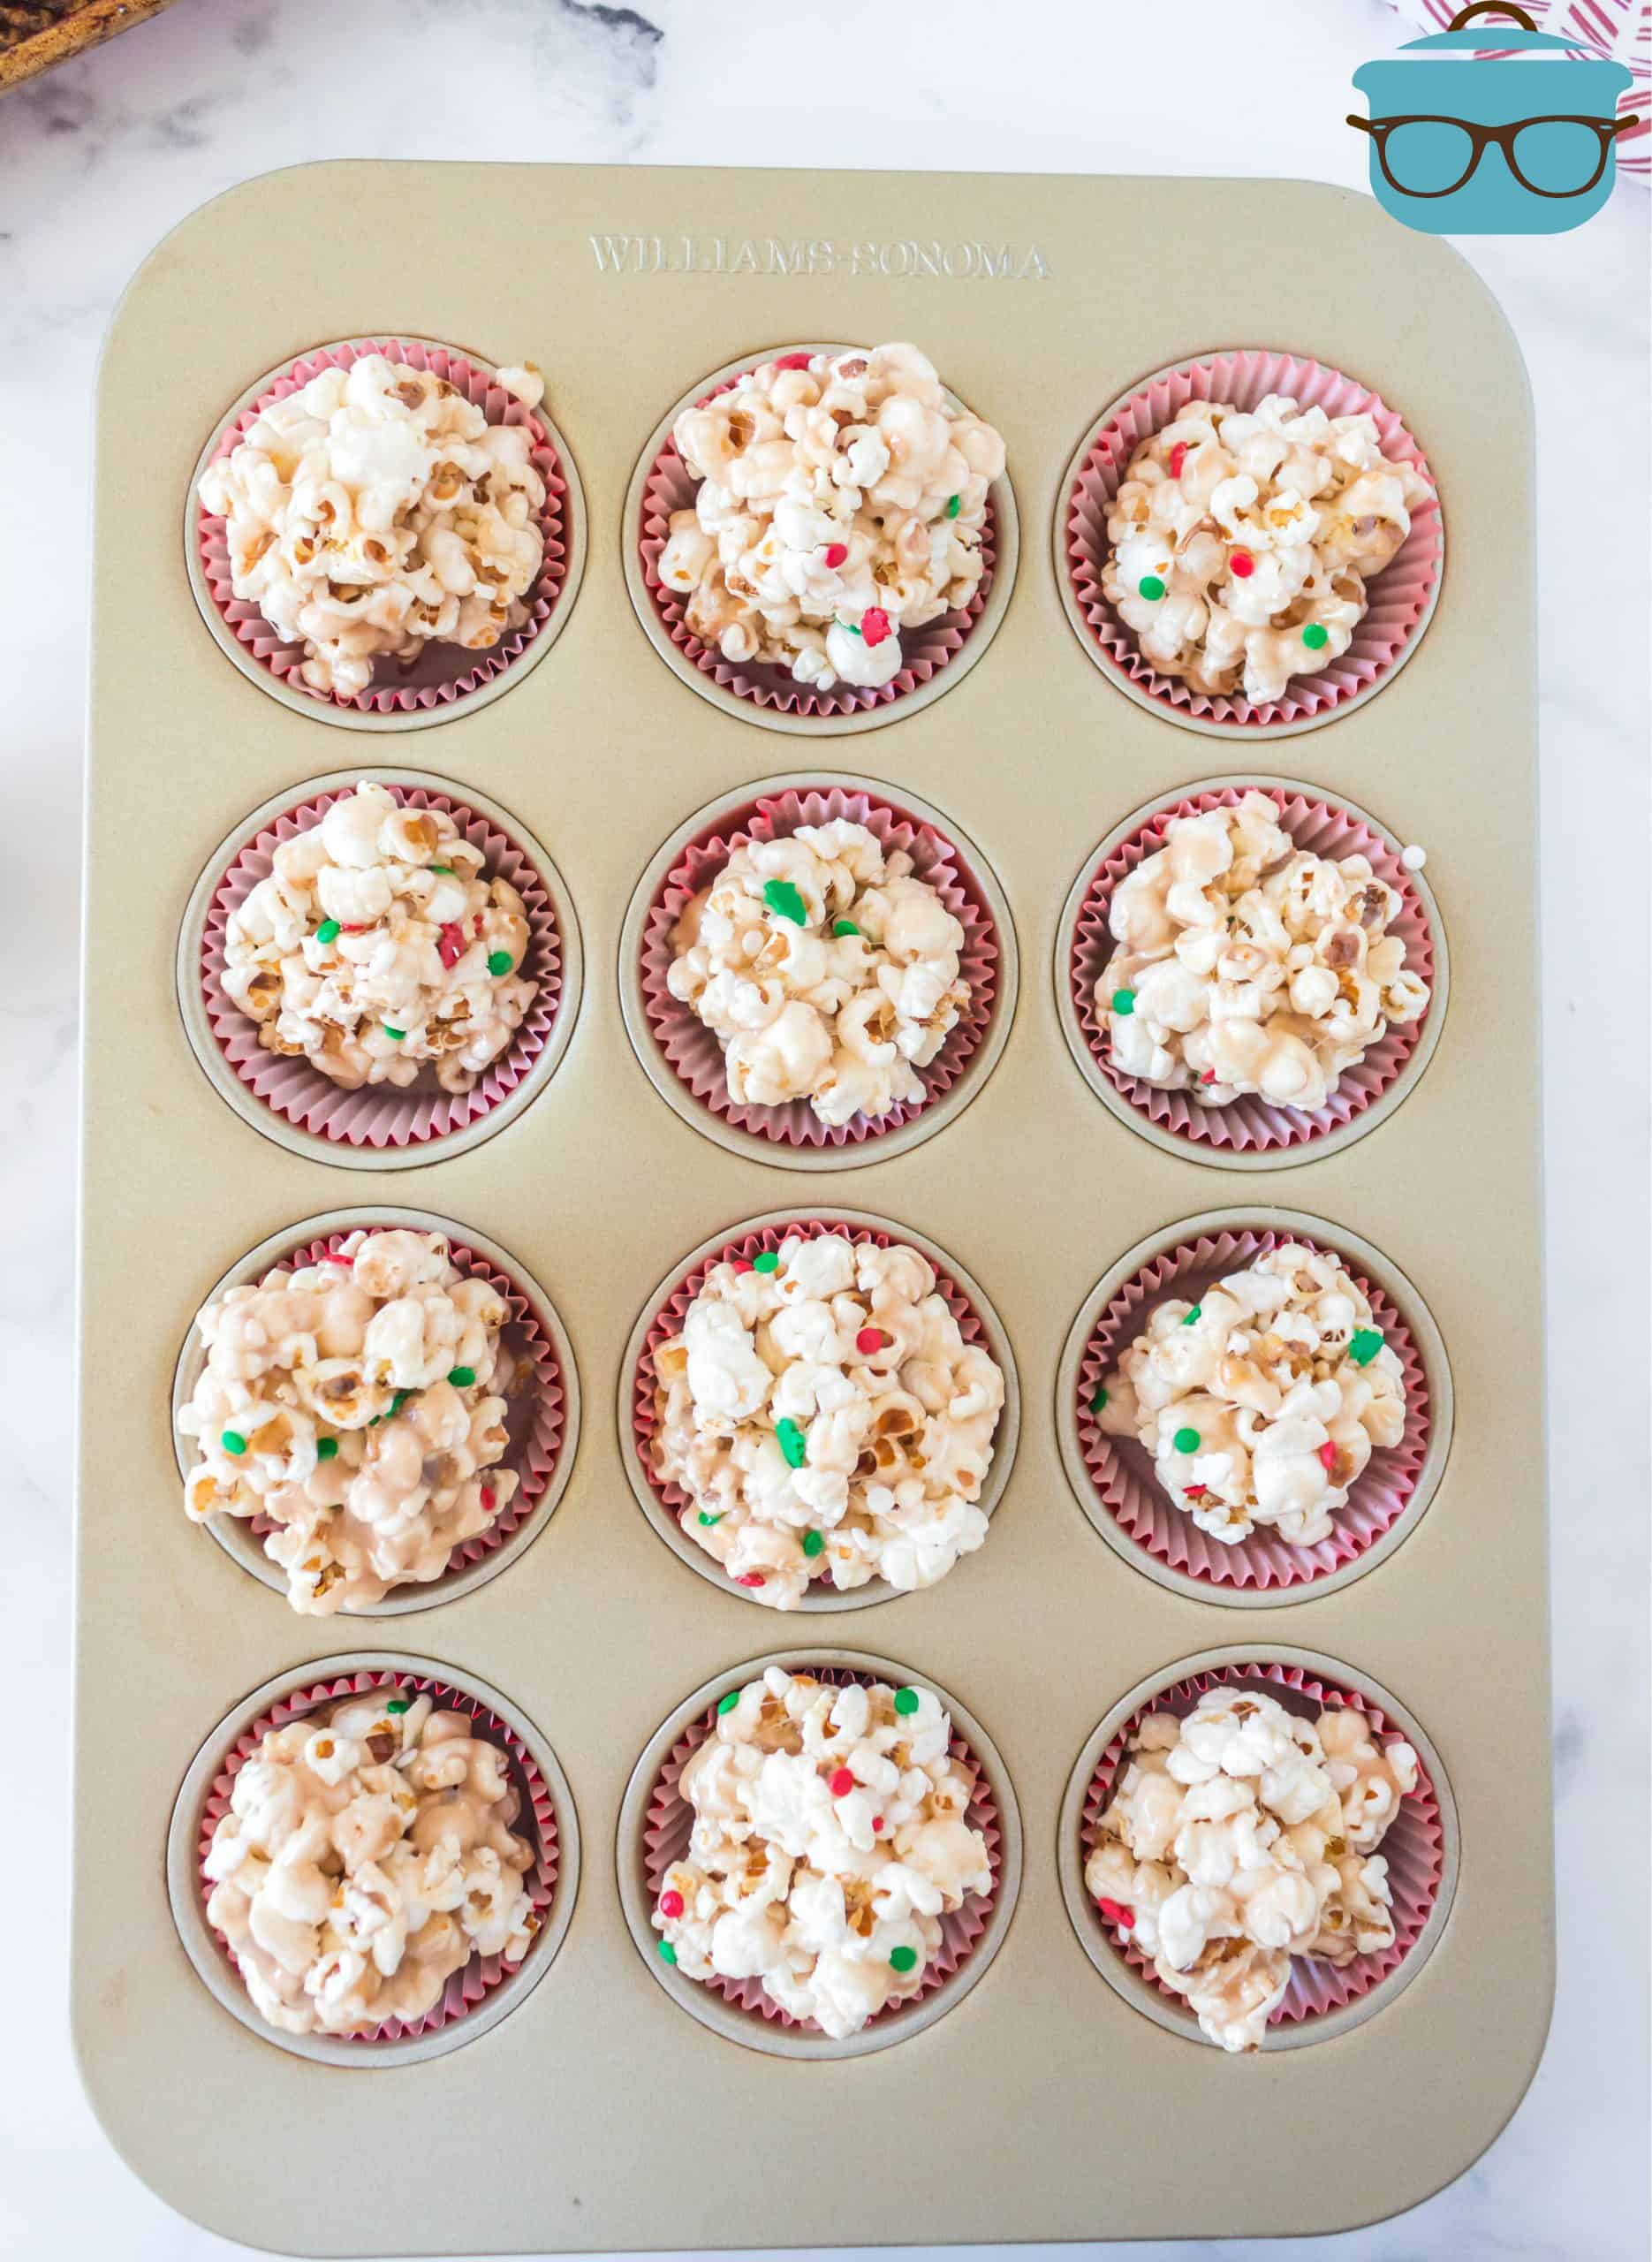 finished popcorn balls in muffin liners in a muffin baking pan.